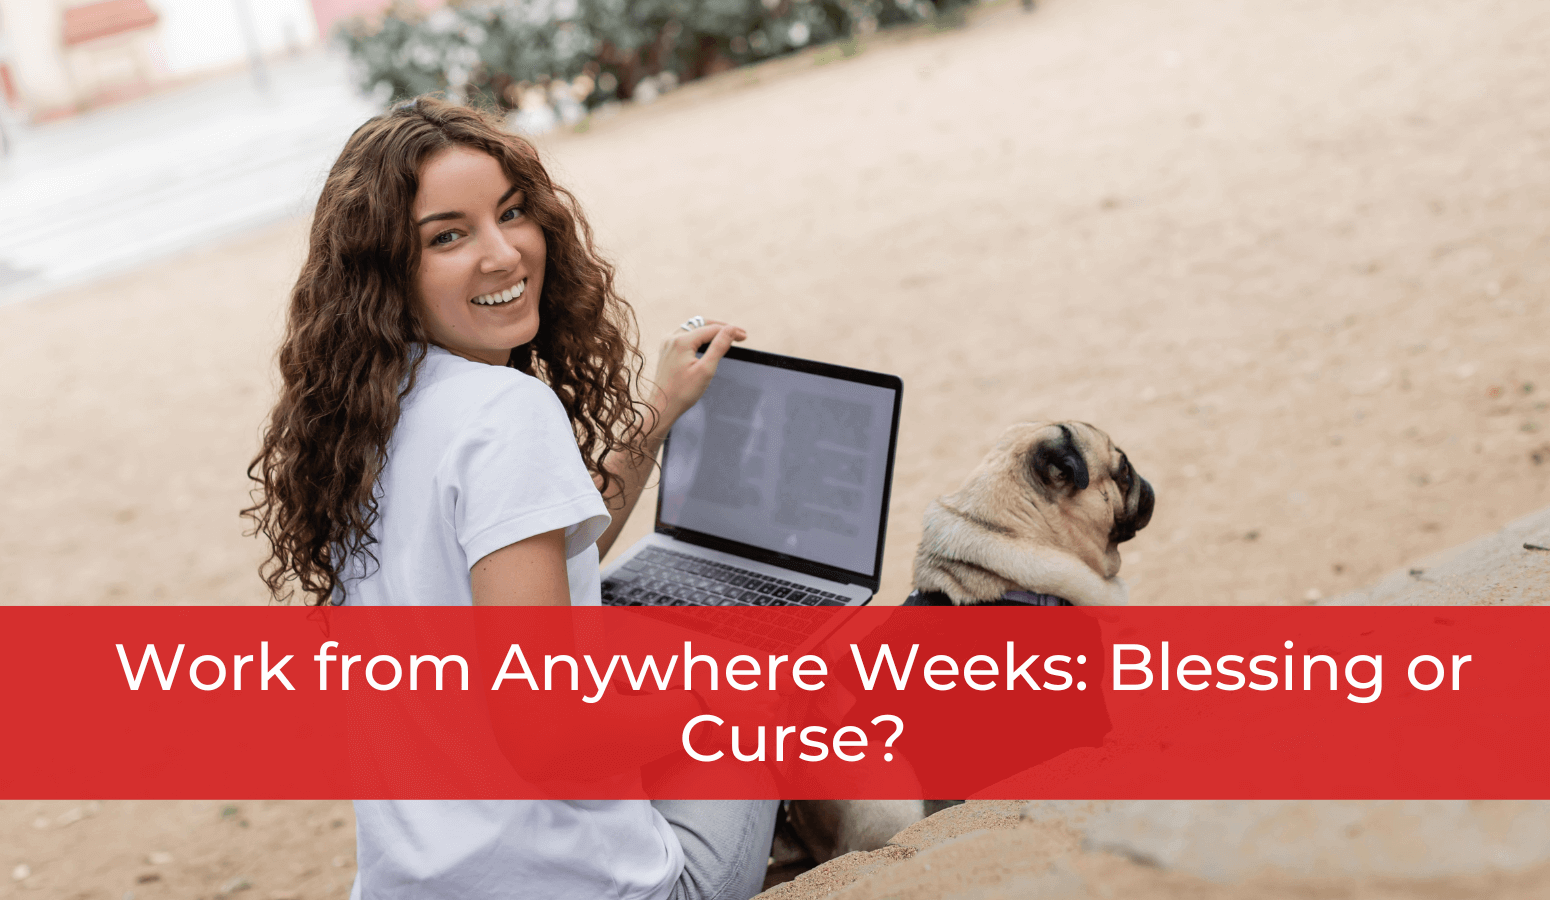 Featured image for “Work from Anywhere Weeks: Blessing or Curse?”